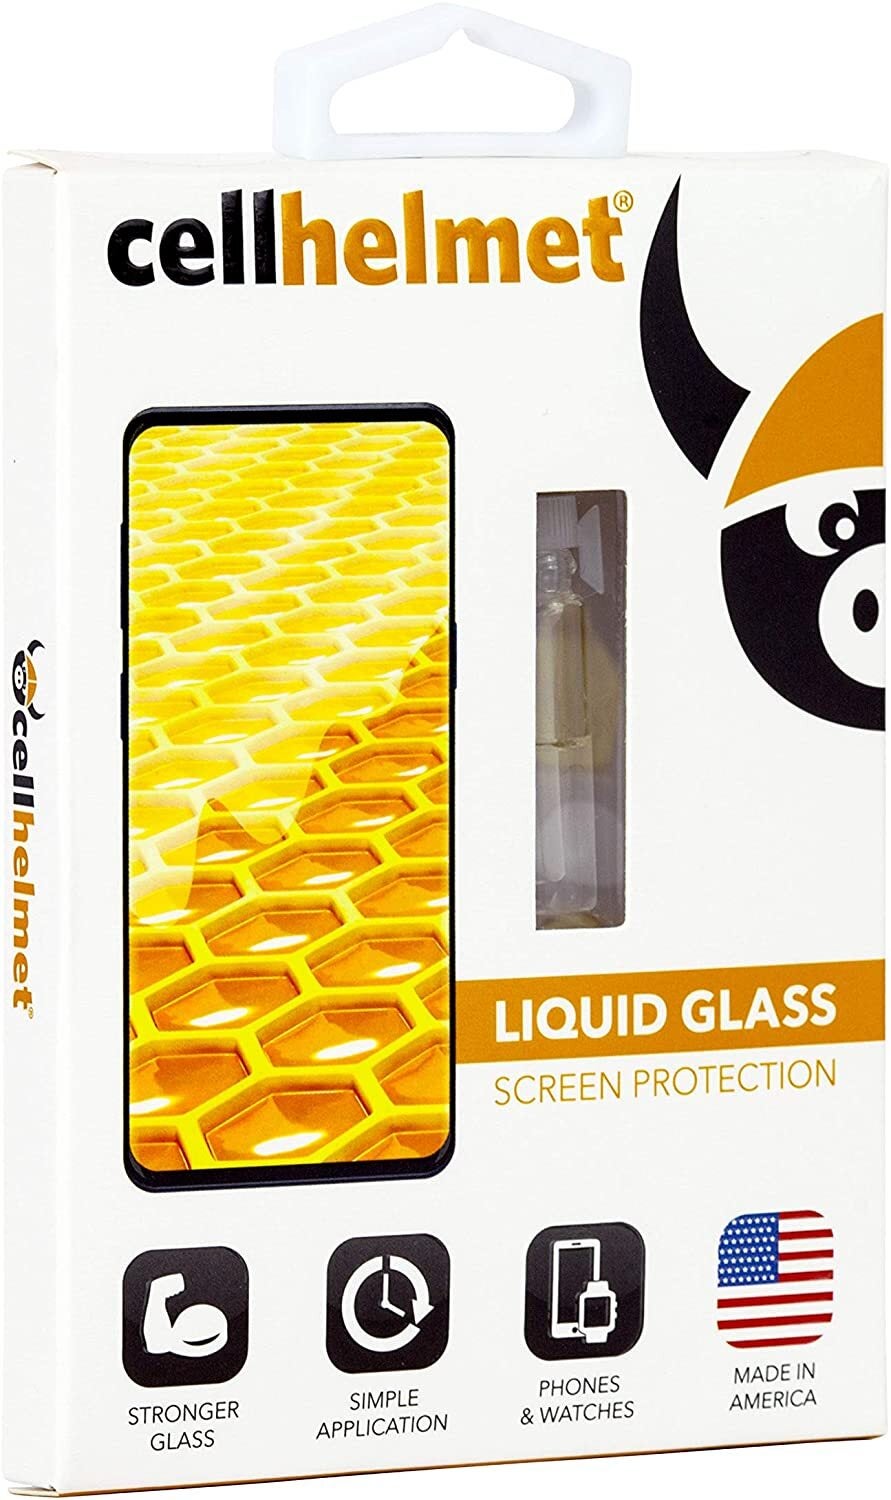 Samsung Galaxy S22 screen protectors are here to cover your new precious phone